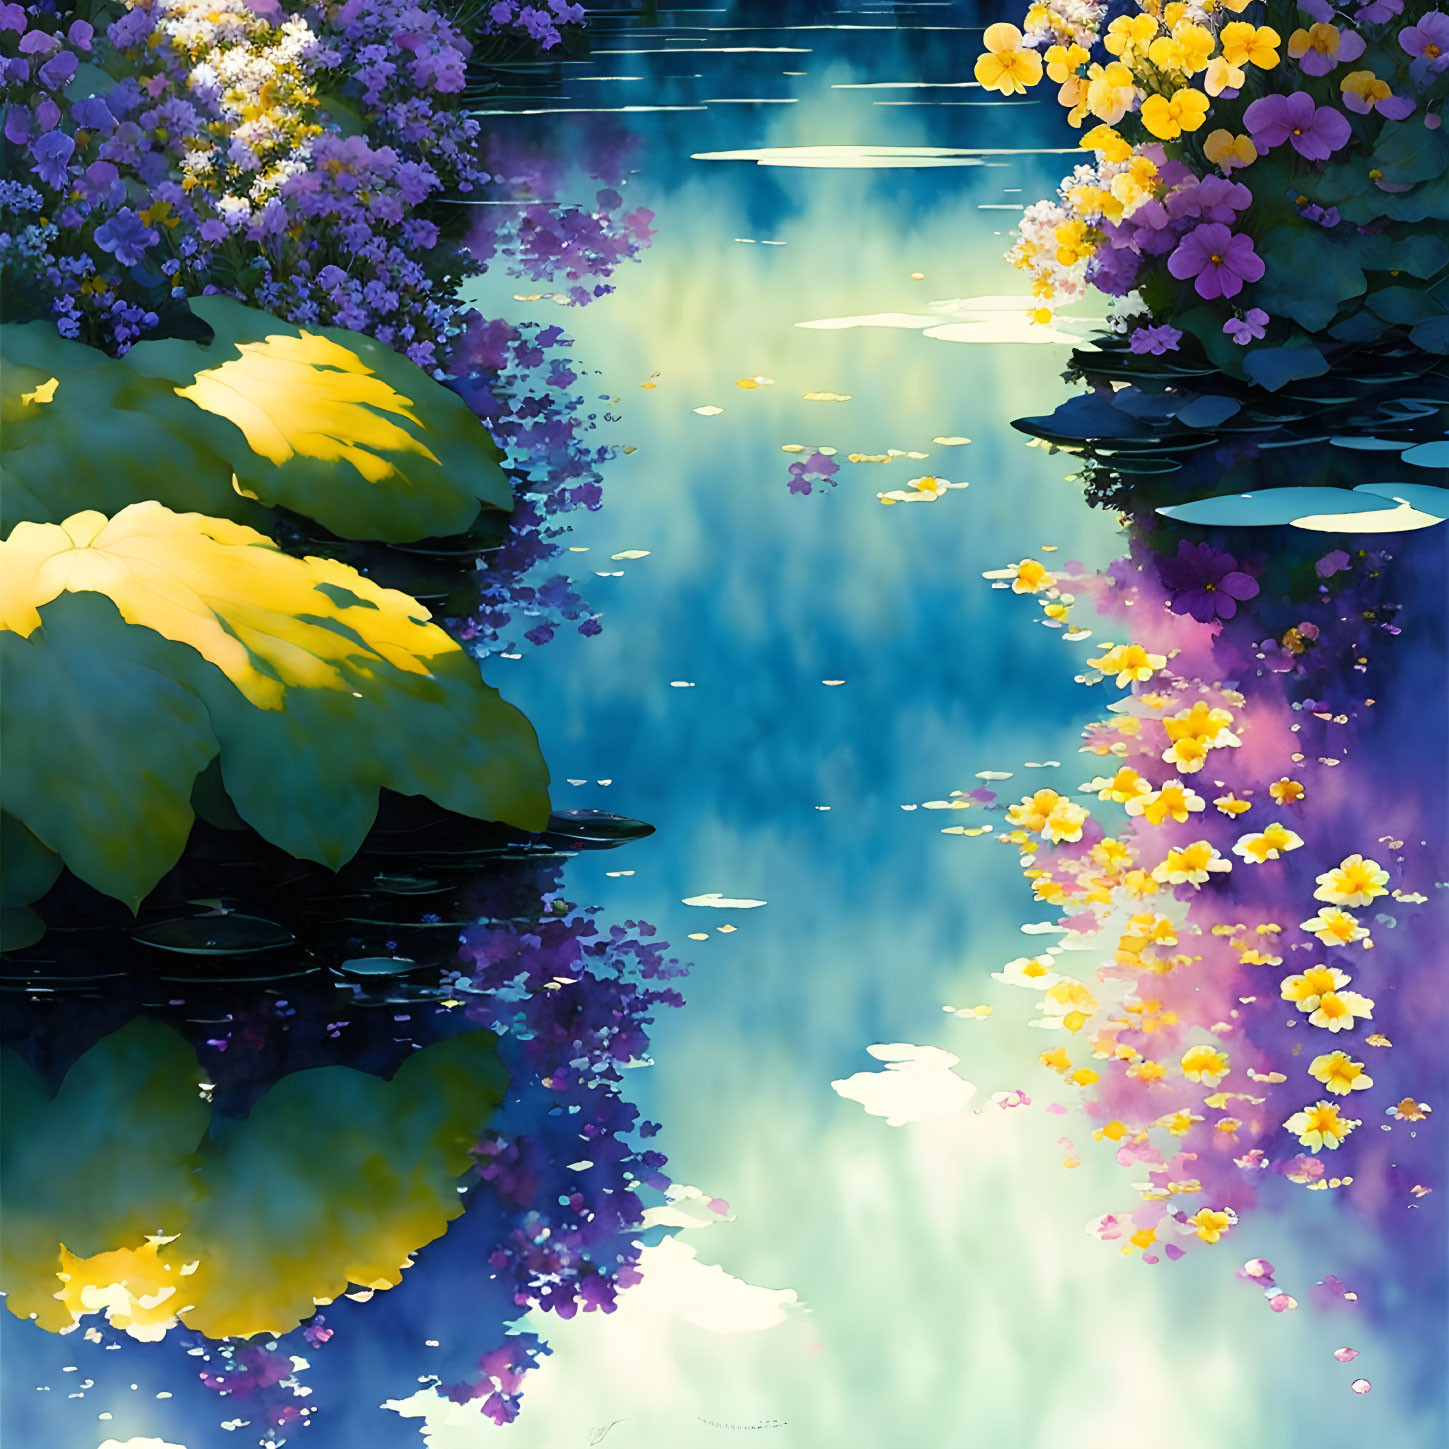 Vibrant digital painting of tranquil pond with purple and yellow blooms, lily pads, and reflections